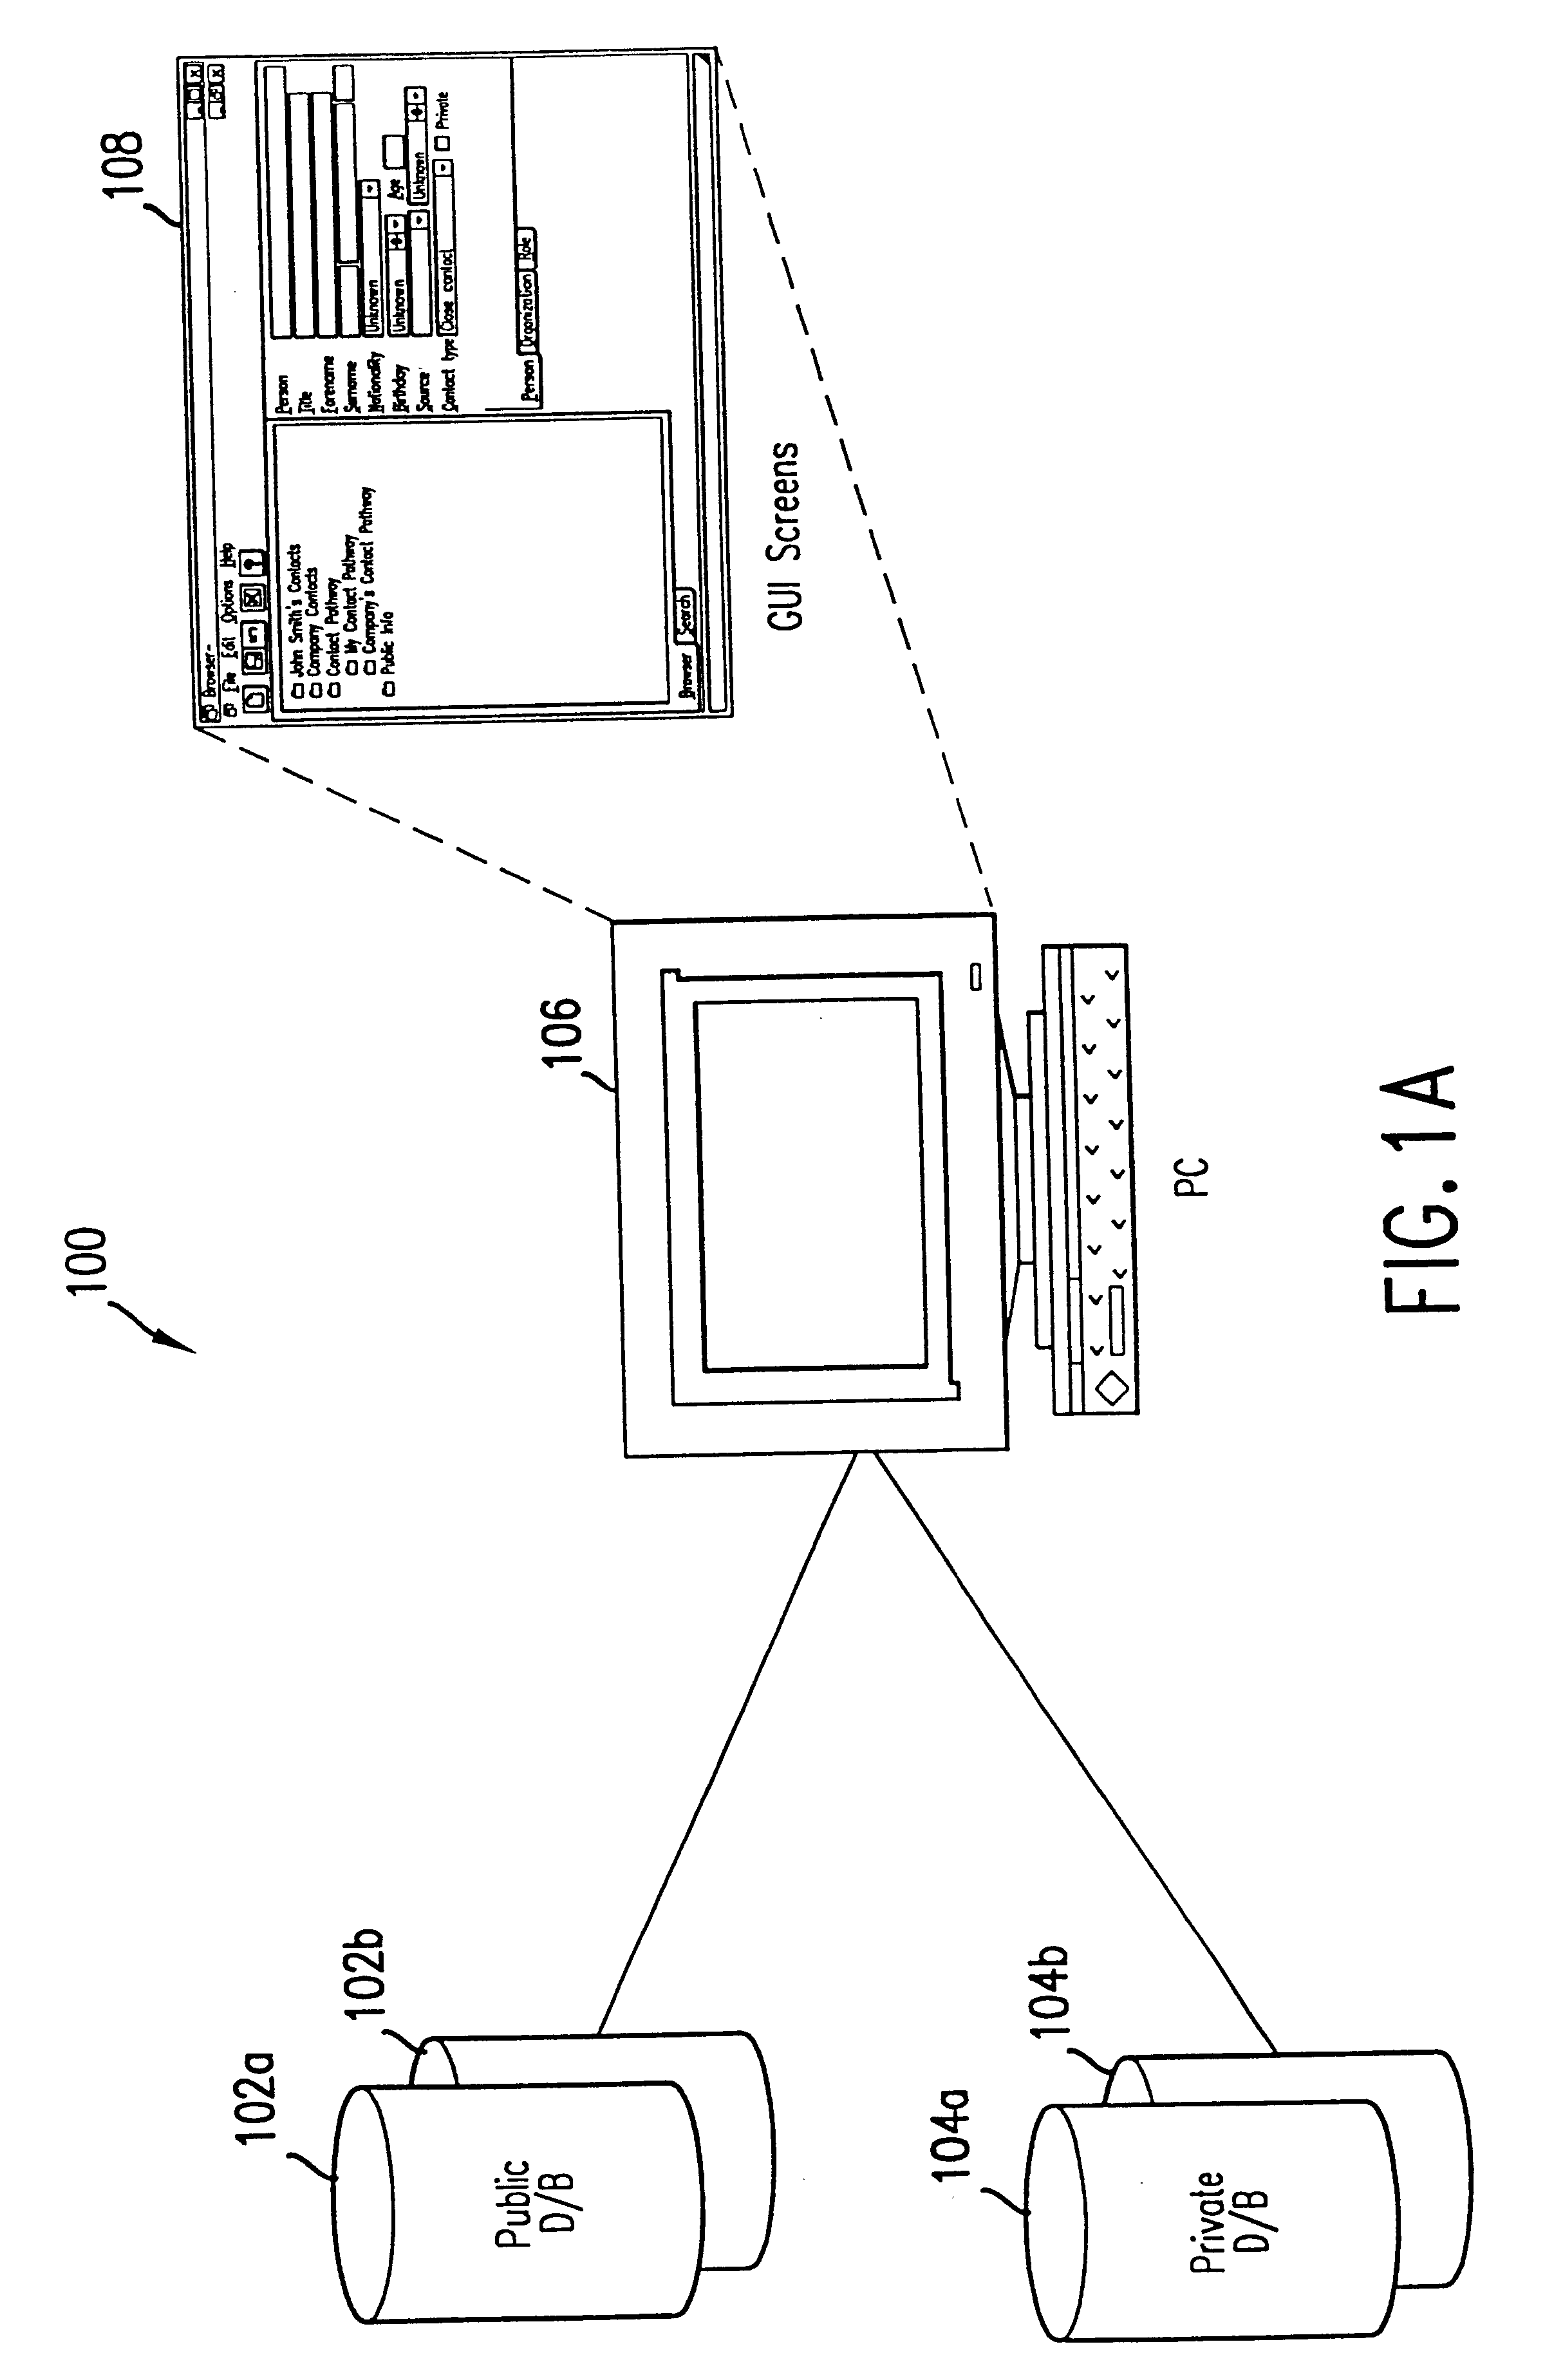 System, method, and computer program product for providing relational patterns between entities